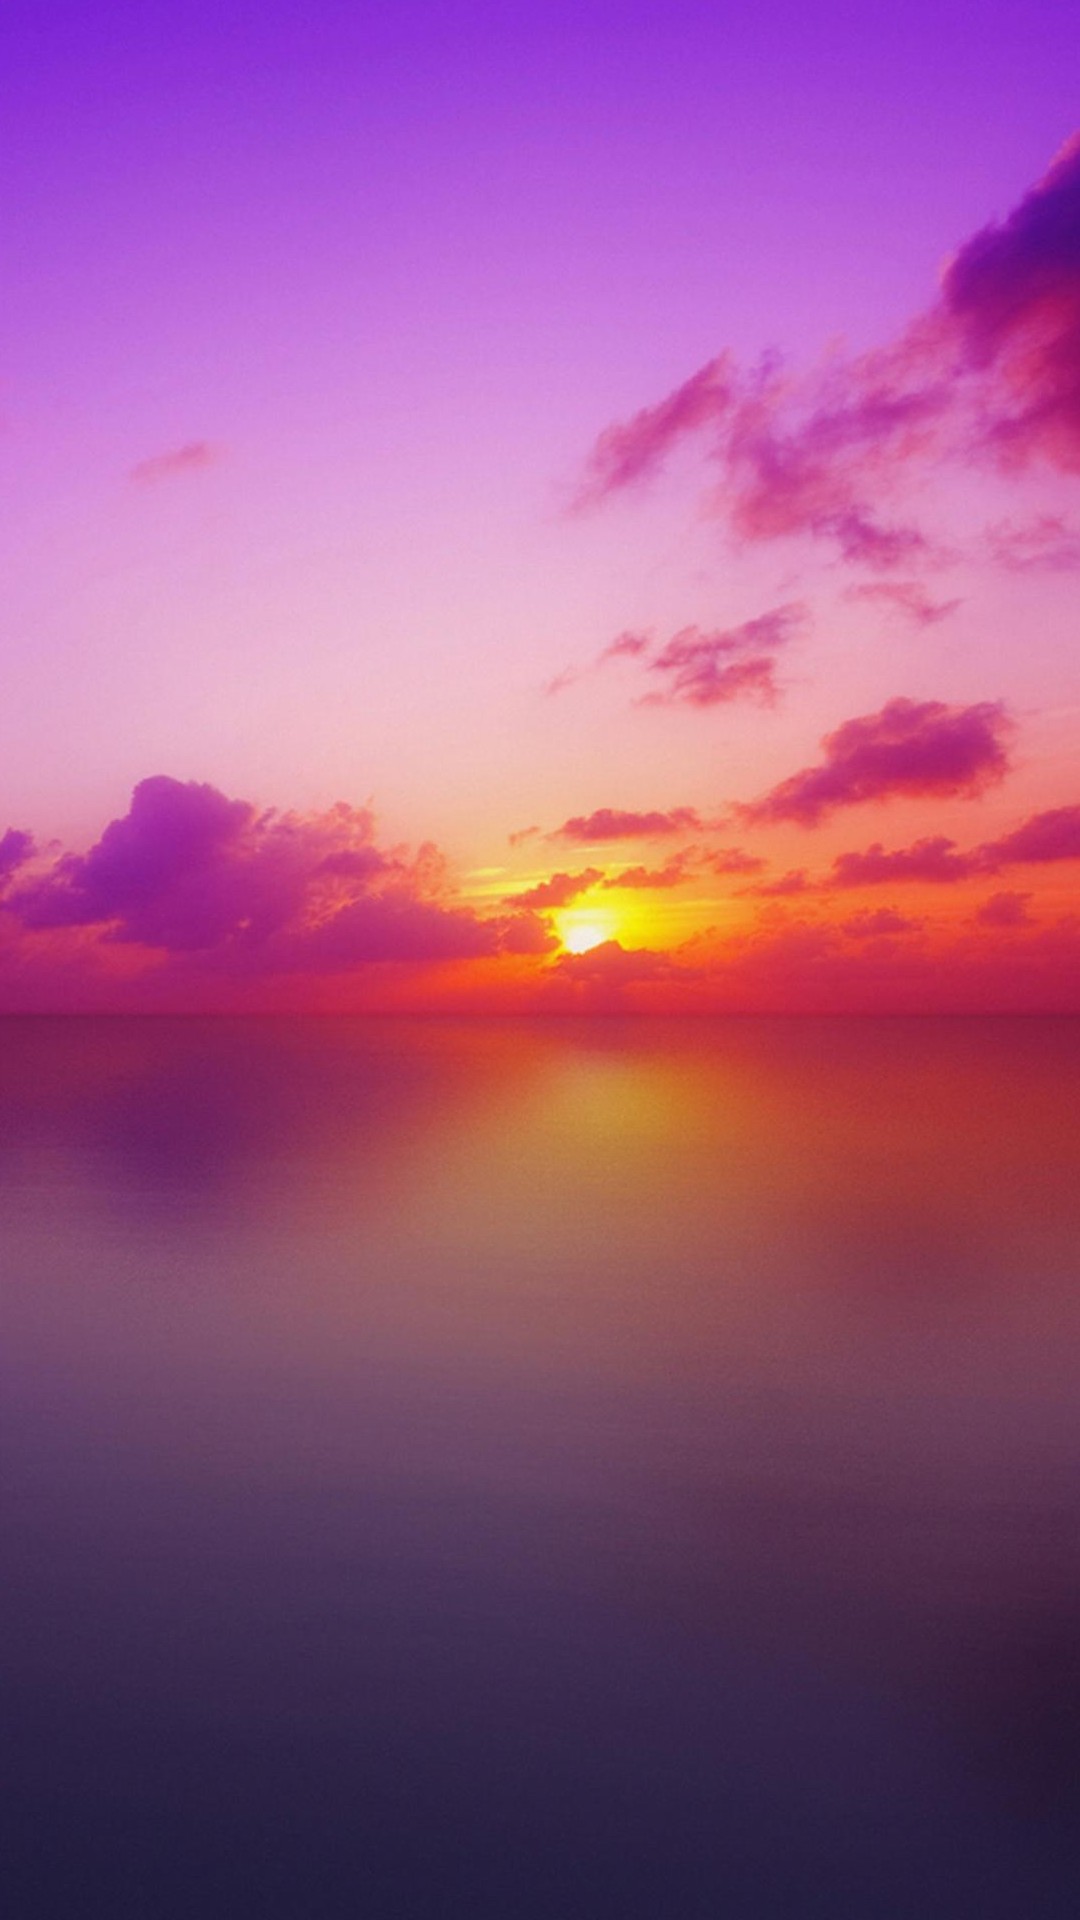 Sunset LG G2 Wallpapers HD 61, LG G2 Wallpapers, LG Wallpapers